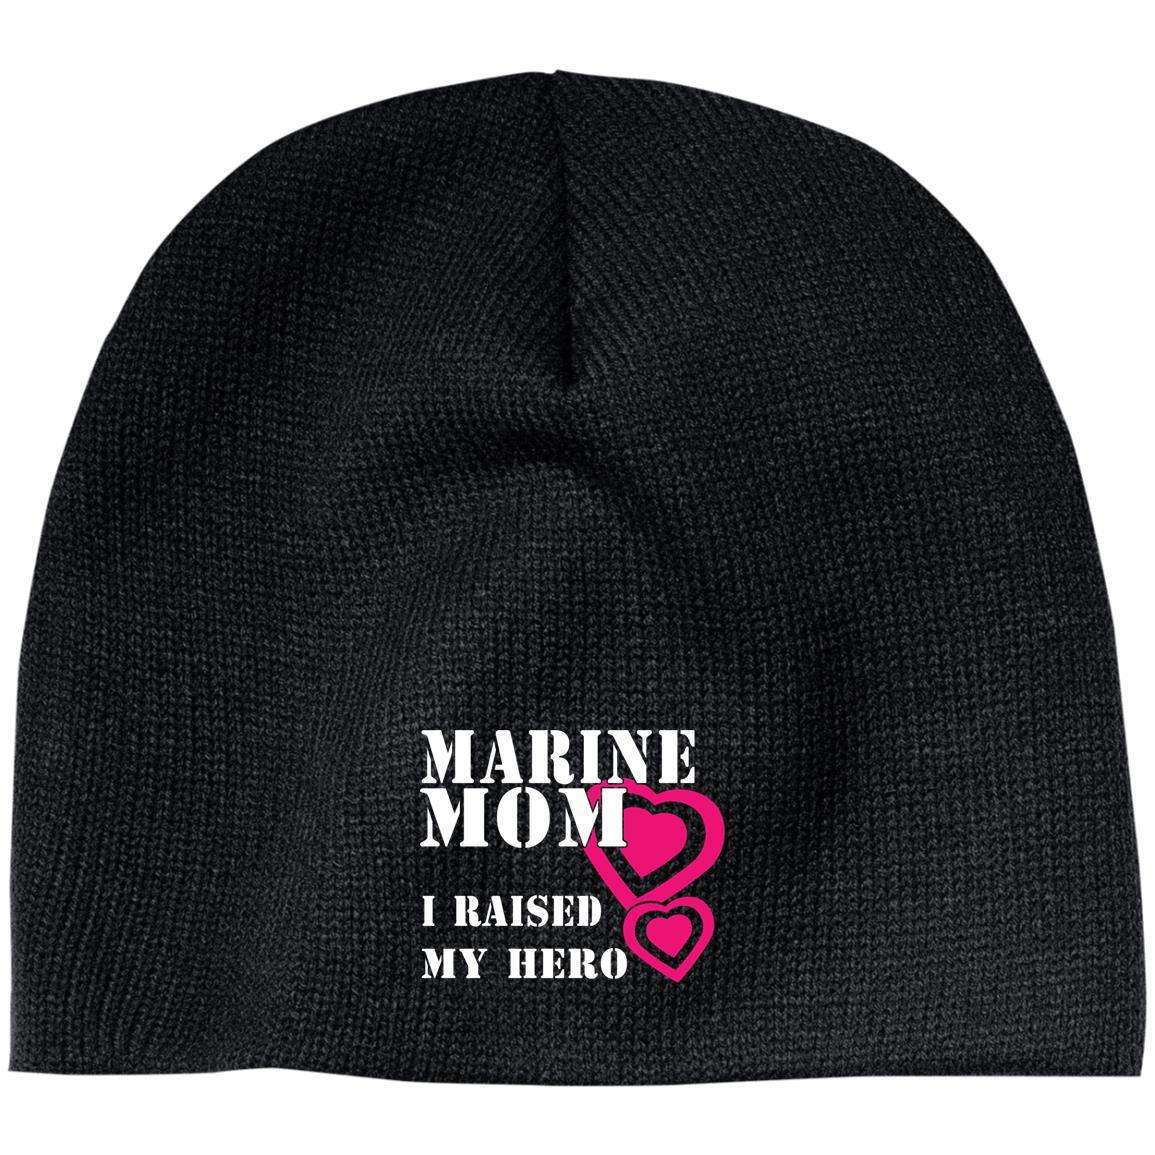 Designs by MyUtopia Shout Out:Marine Mom I raised my Hero 100% Acrylic Beanie Hat,Black / One Size,Hats